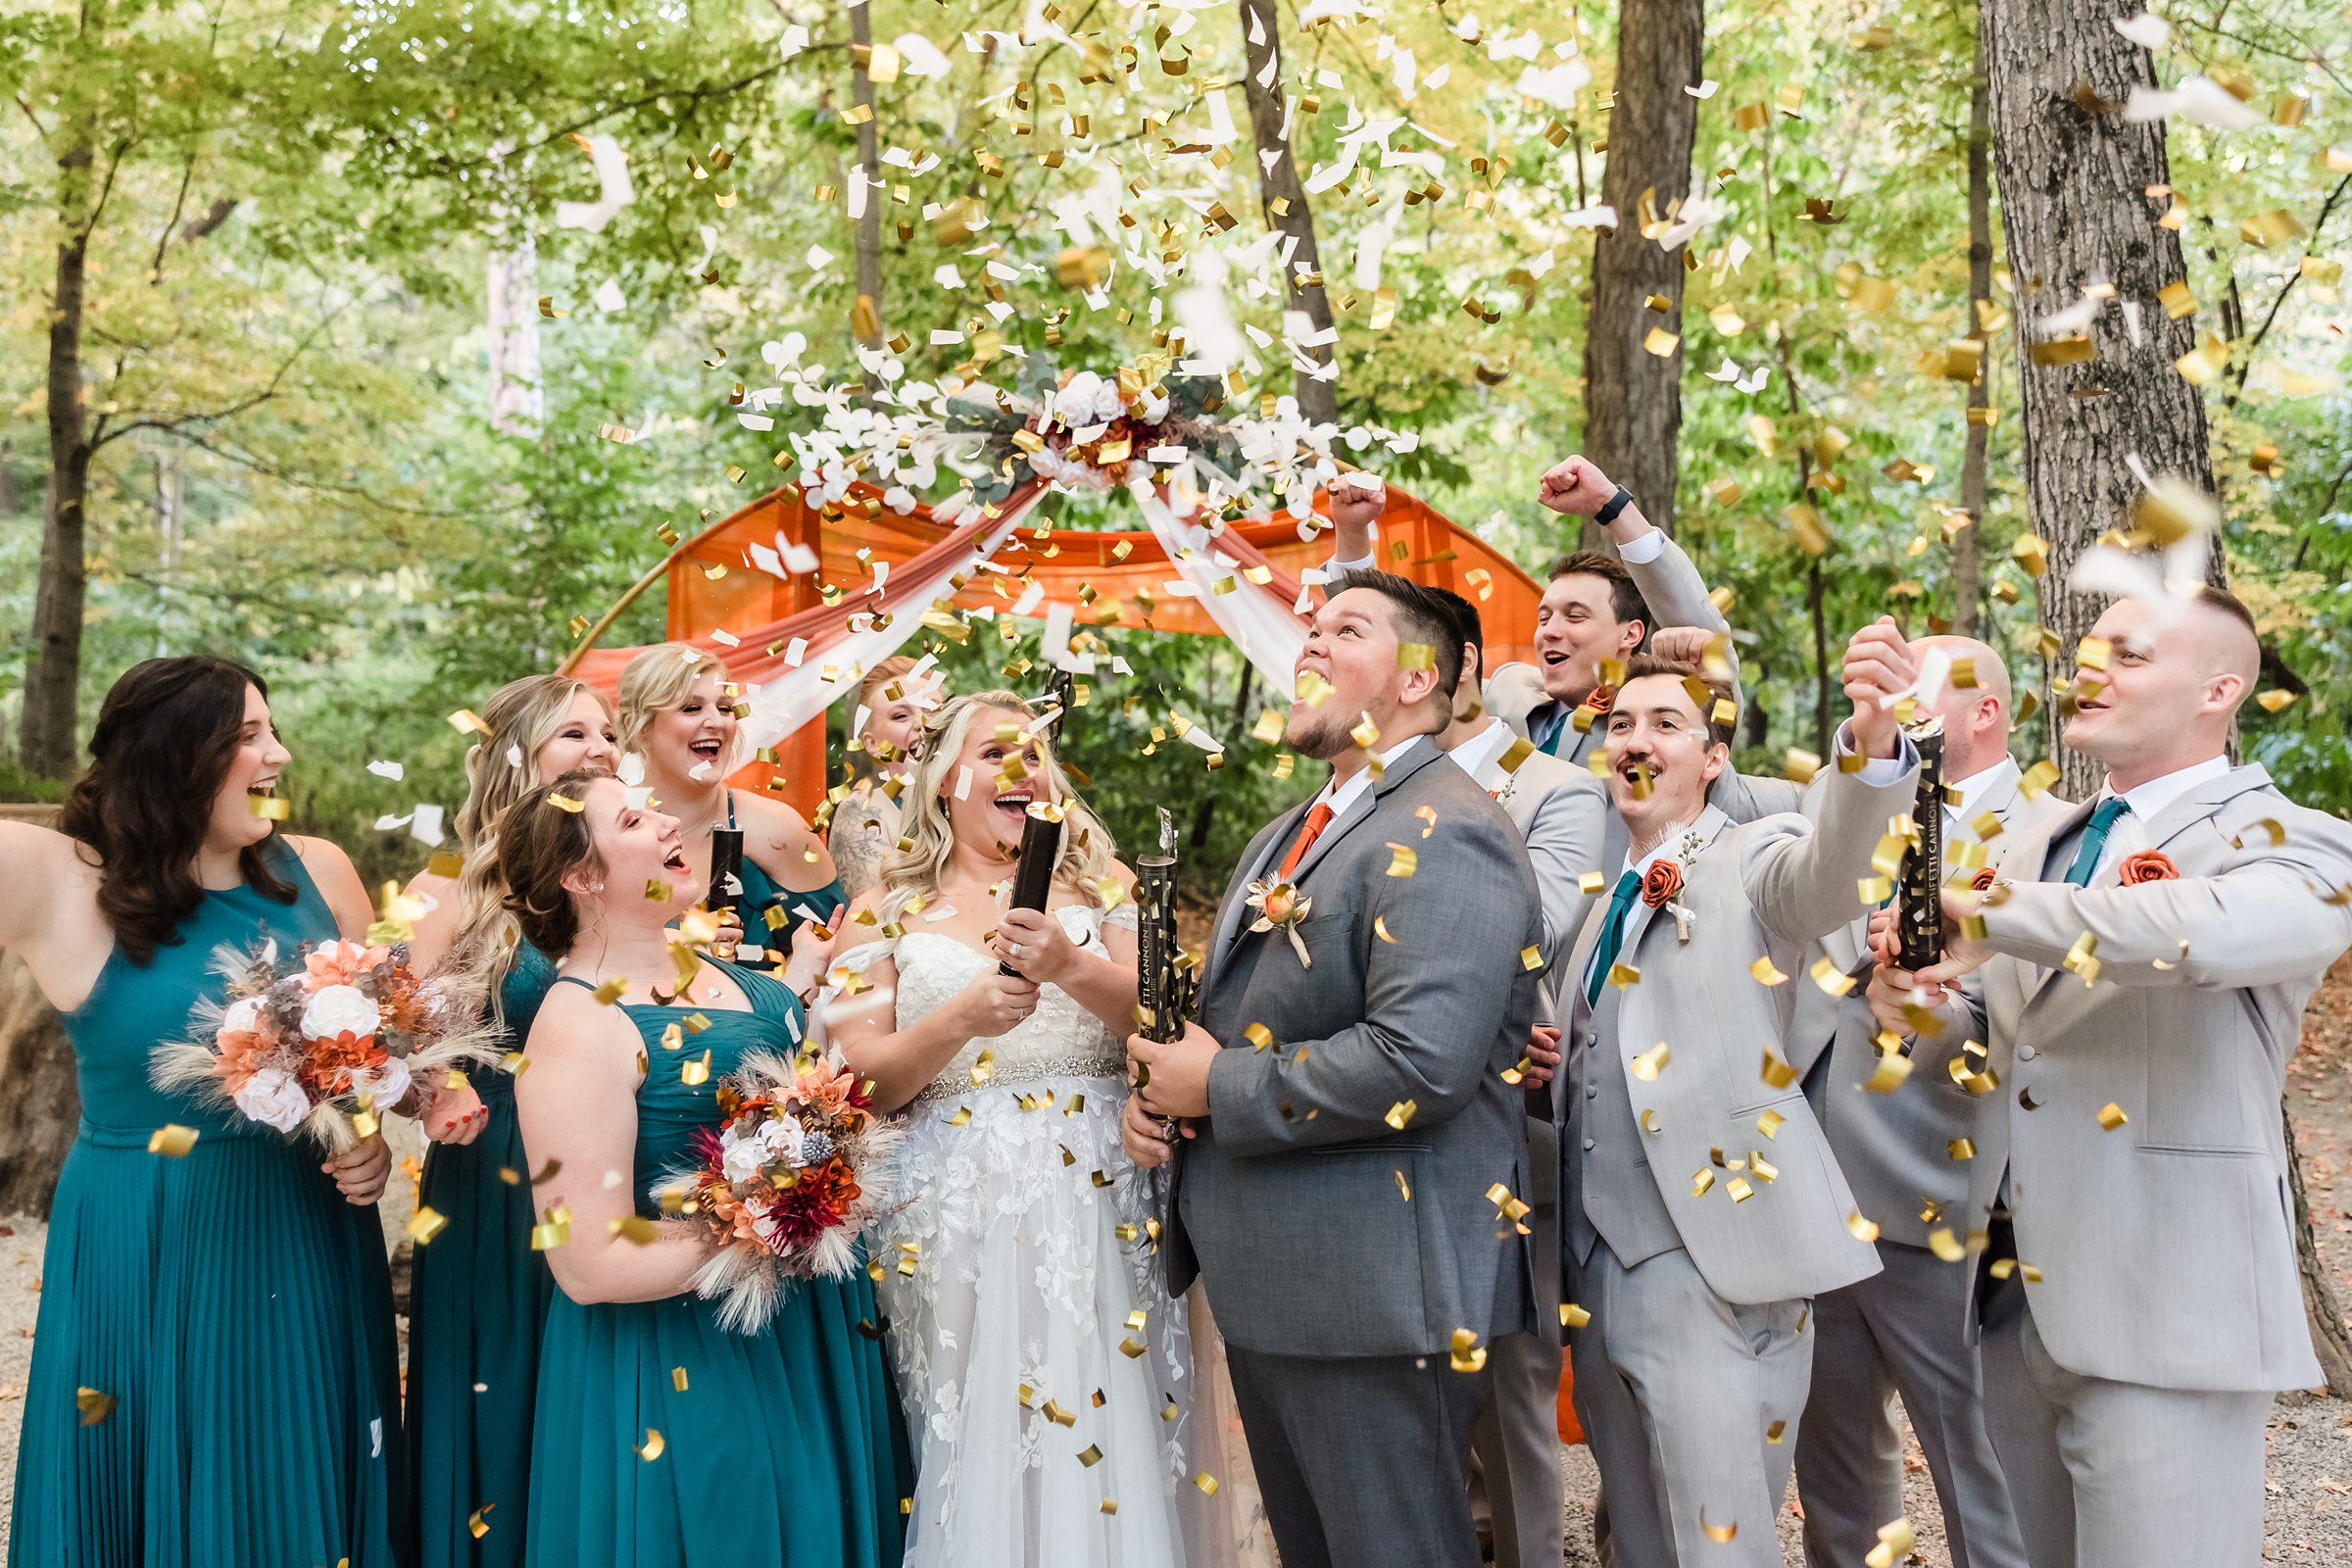 Bridal party celebrate during a wedding ceremony at Funks Grove in Mclean, Illinois.